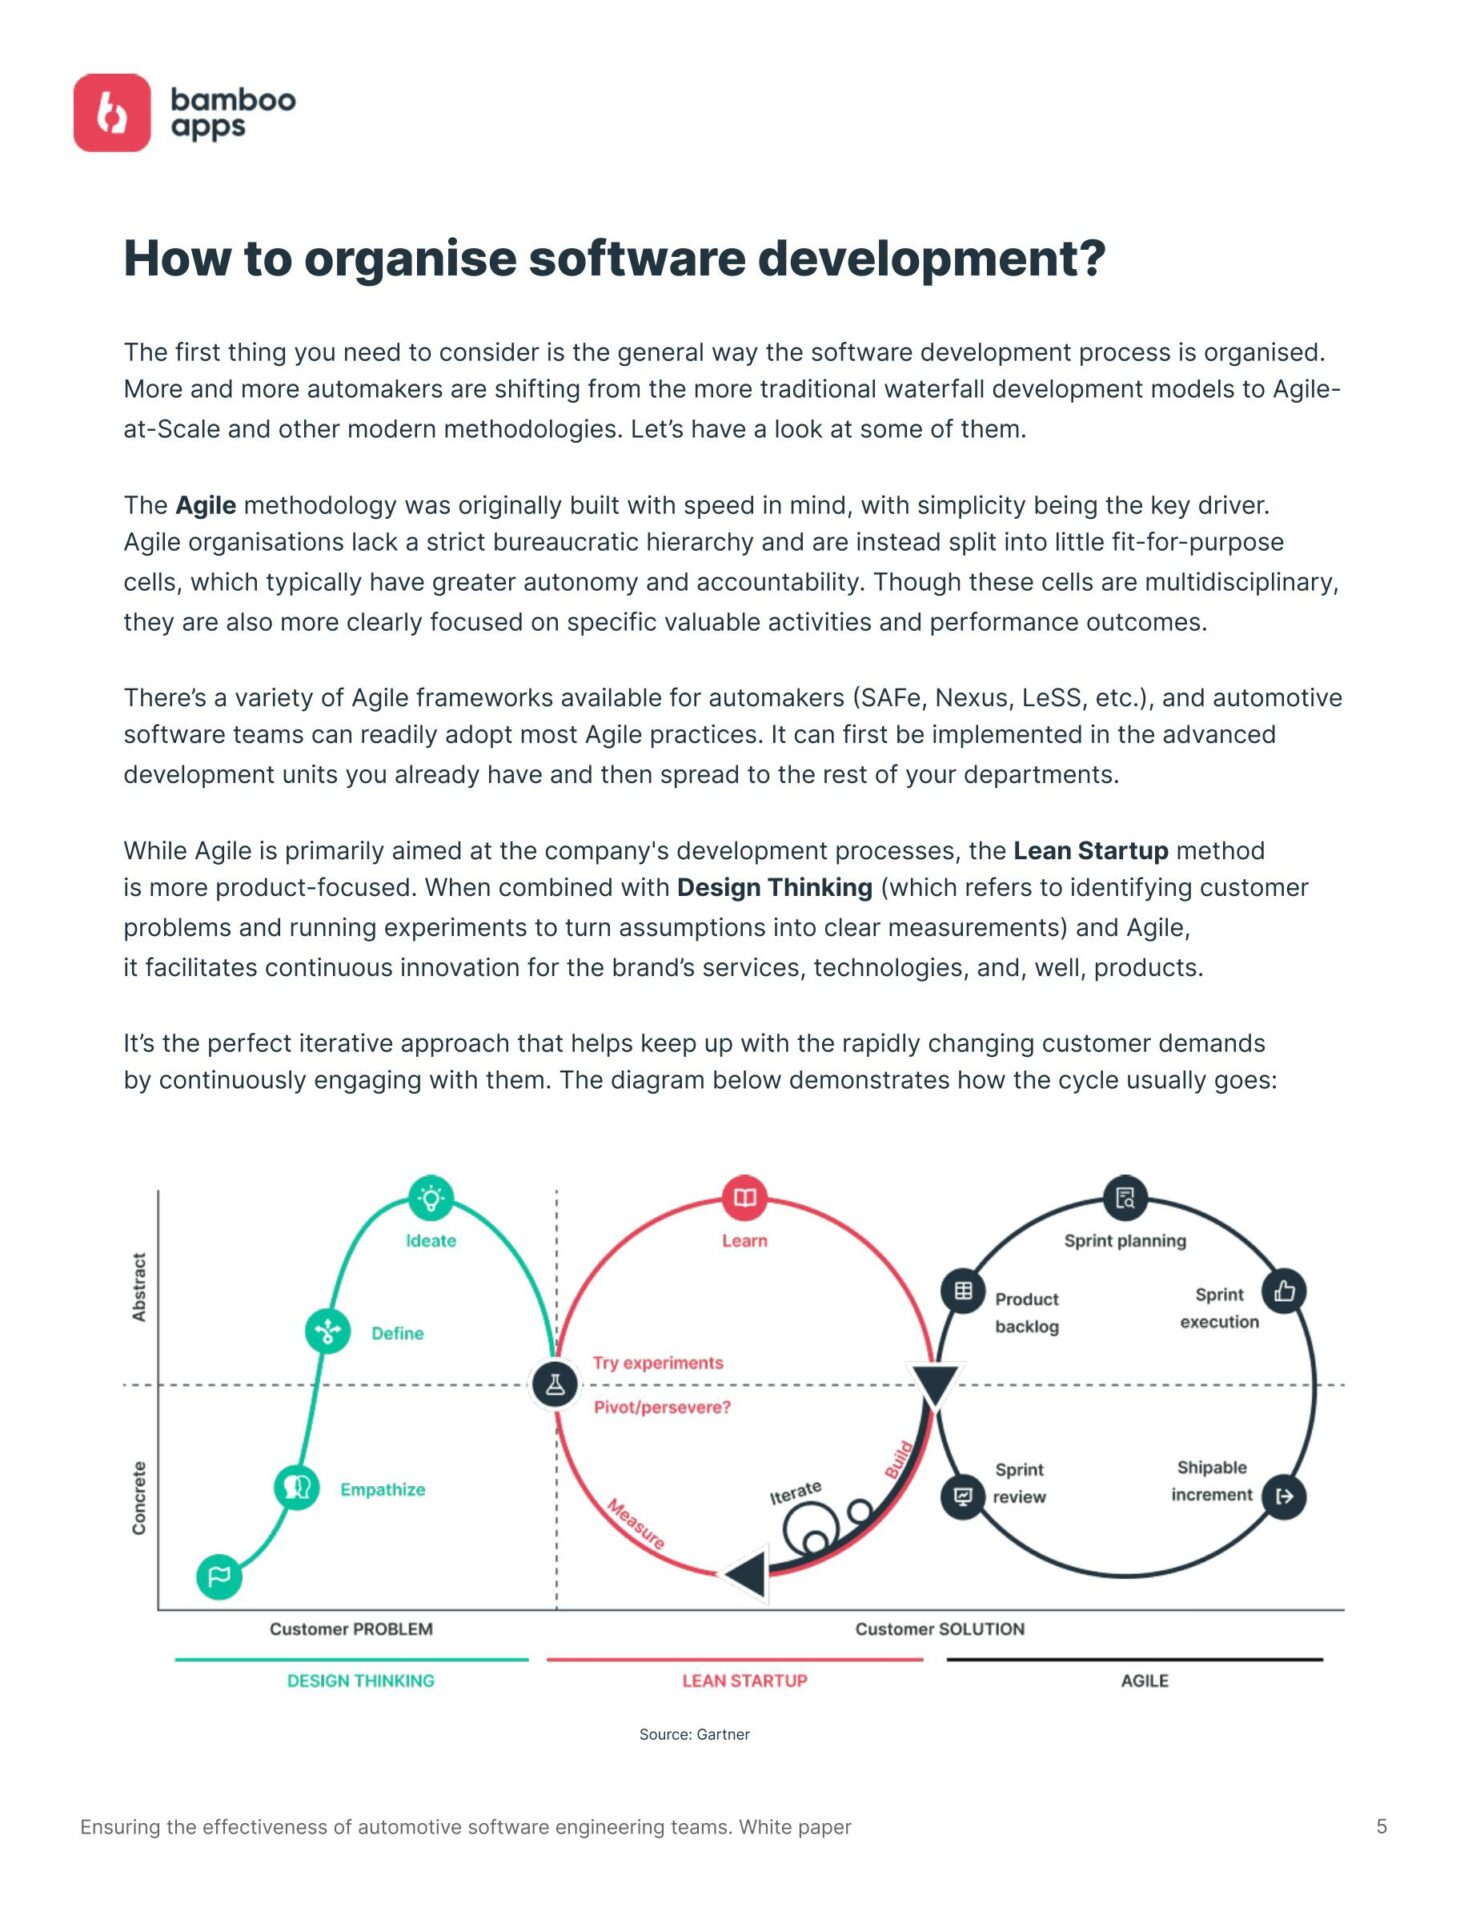 The effectiveness of automotive software engineering teams | How to organise software development